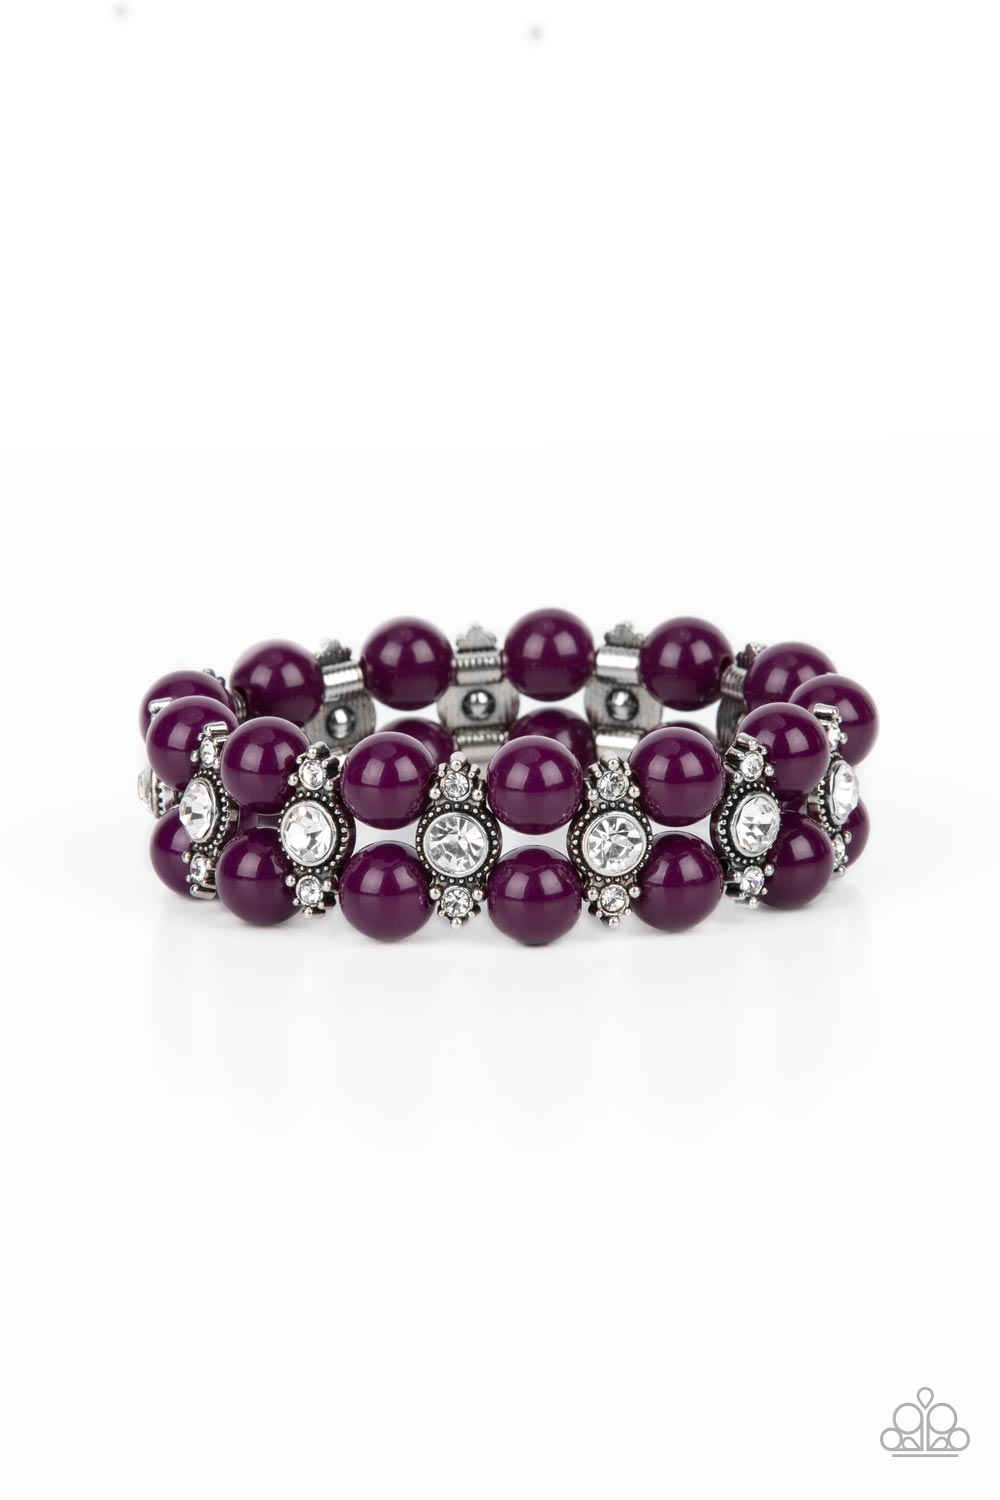 Stacked rows of bubbly plum beads alternate with white rhinestone encrusted silver frames along stretchy bands